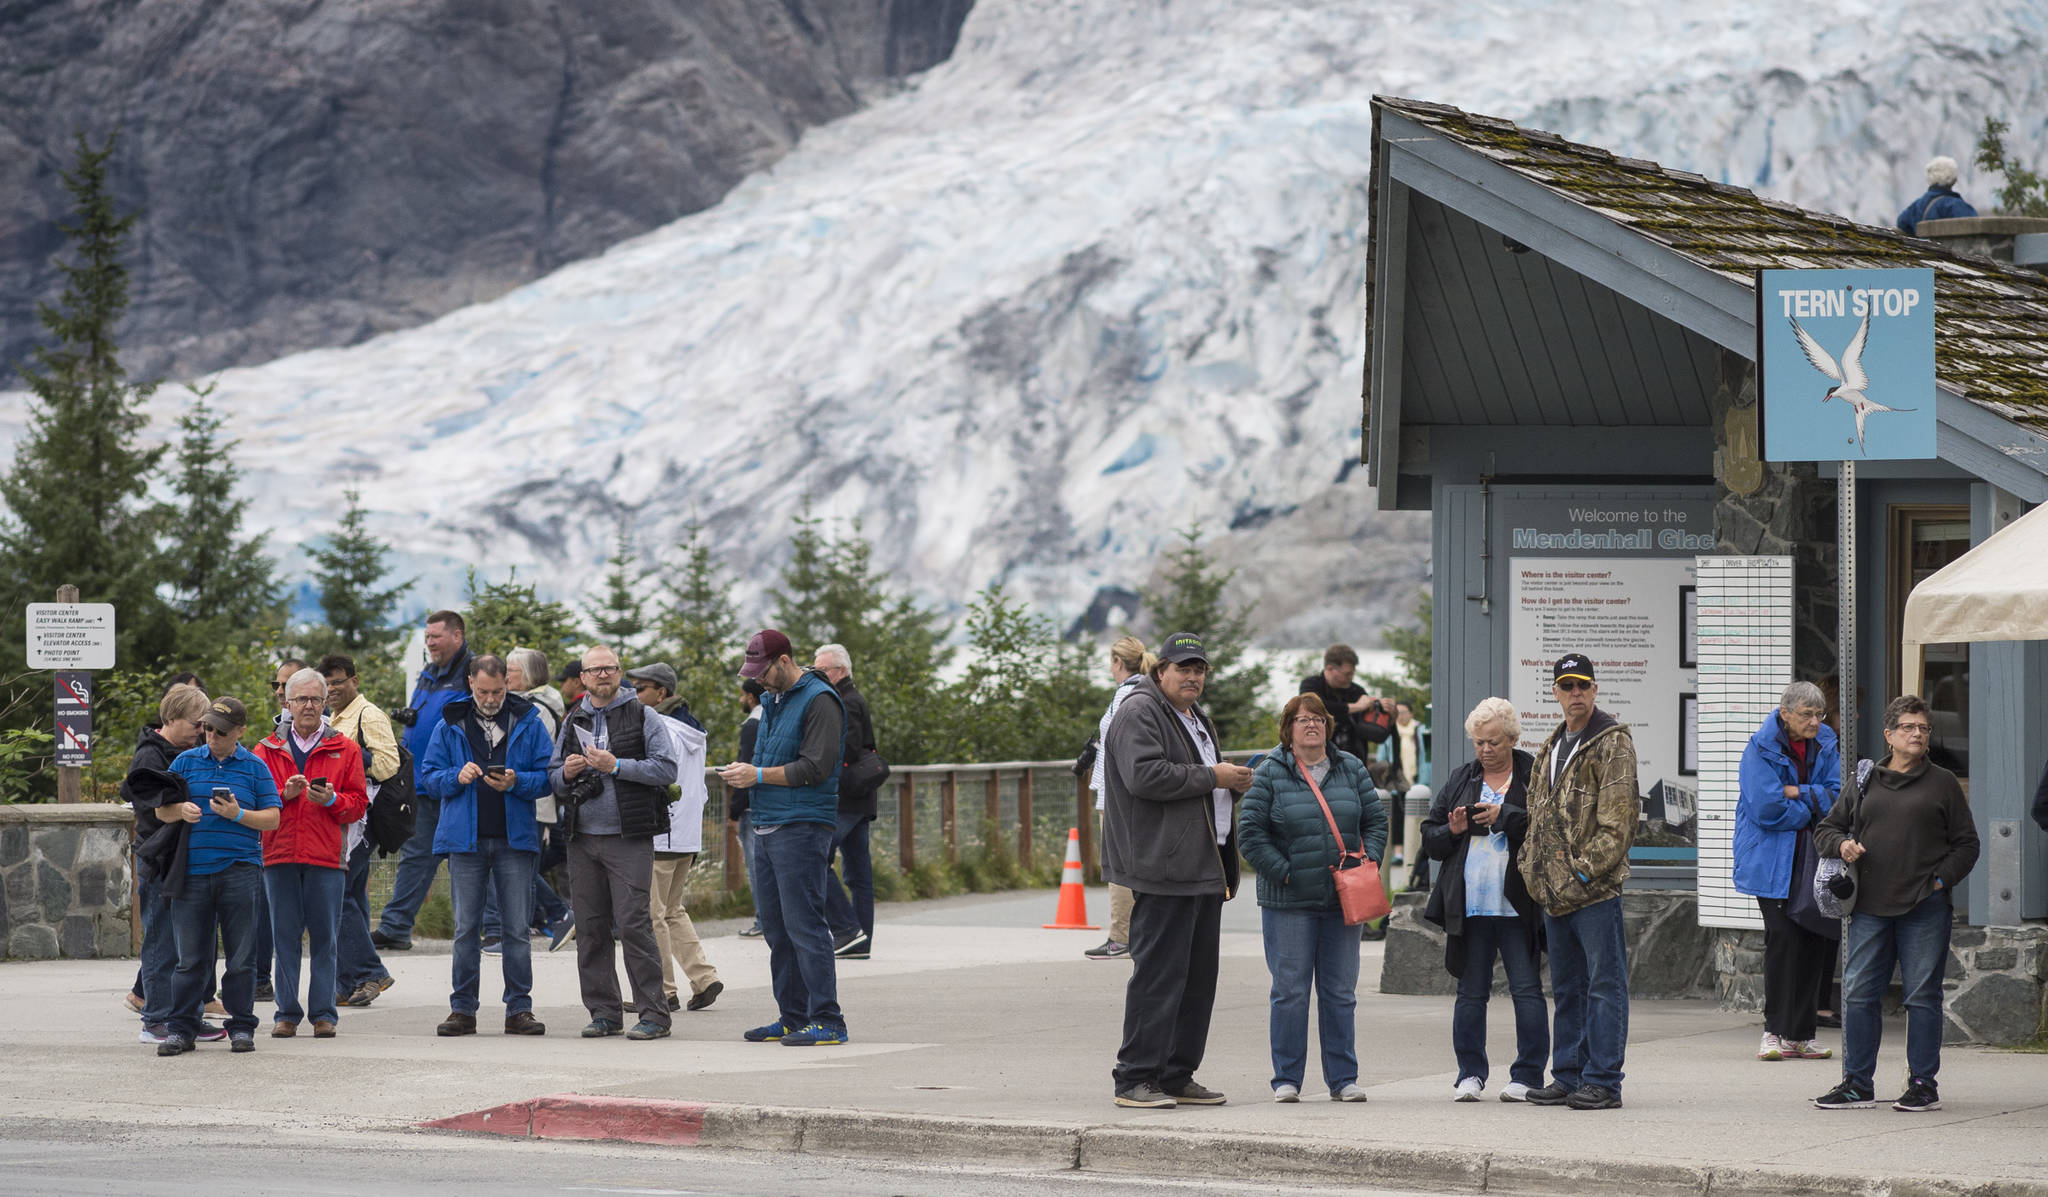 Visitors wait for the buses at the Mendenhall Glacier Visitor Center on Thursday, August 16, 2018. (Michael Penn | Juneau Empire)